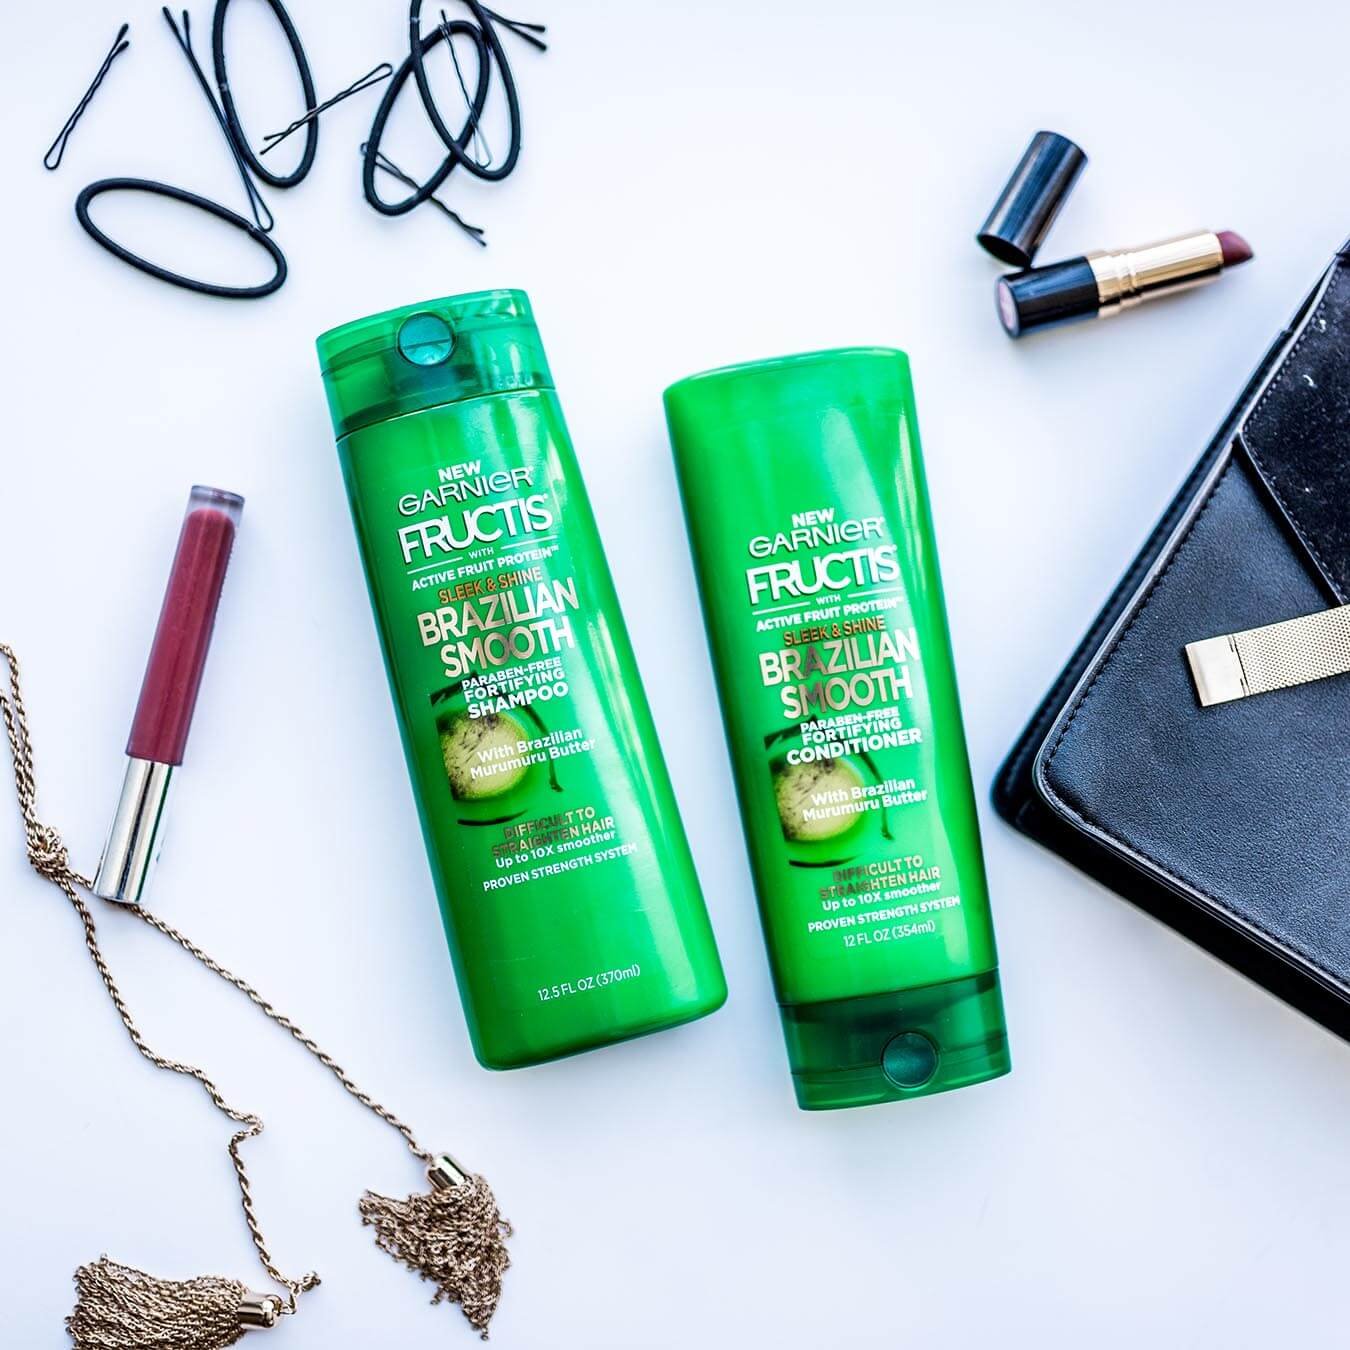 Garnier Fructis Brazilian Smooth Shampoo and Brazilian Smooth Conditioner on a blue background next to a leather purse, an open red lipstick, lip gloss, a knotted metal gold tassel, and several bobby pins and hair ties.